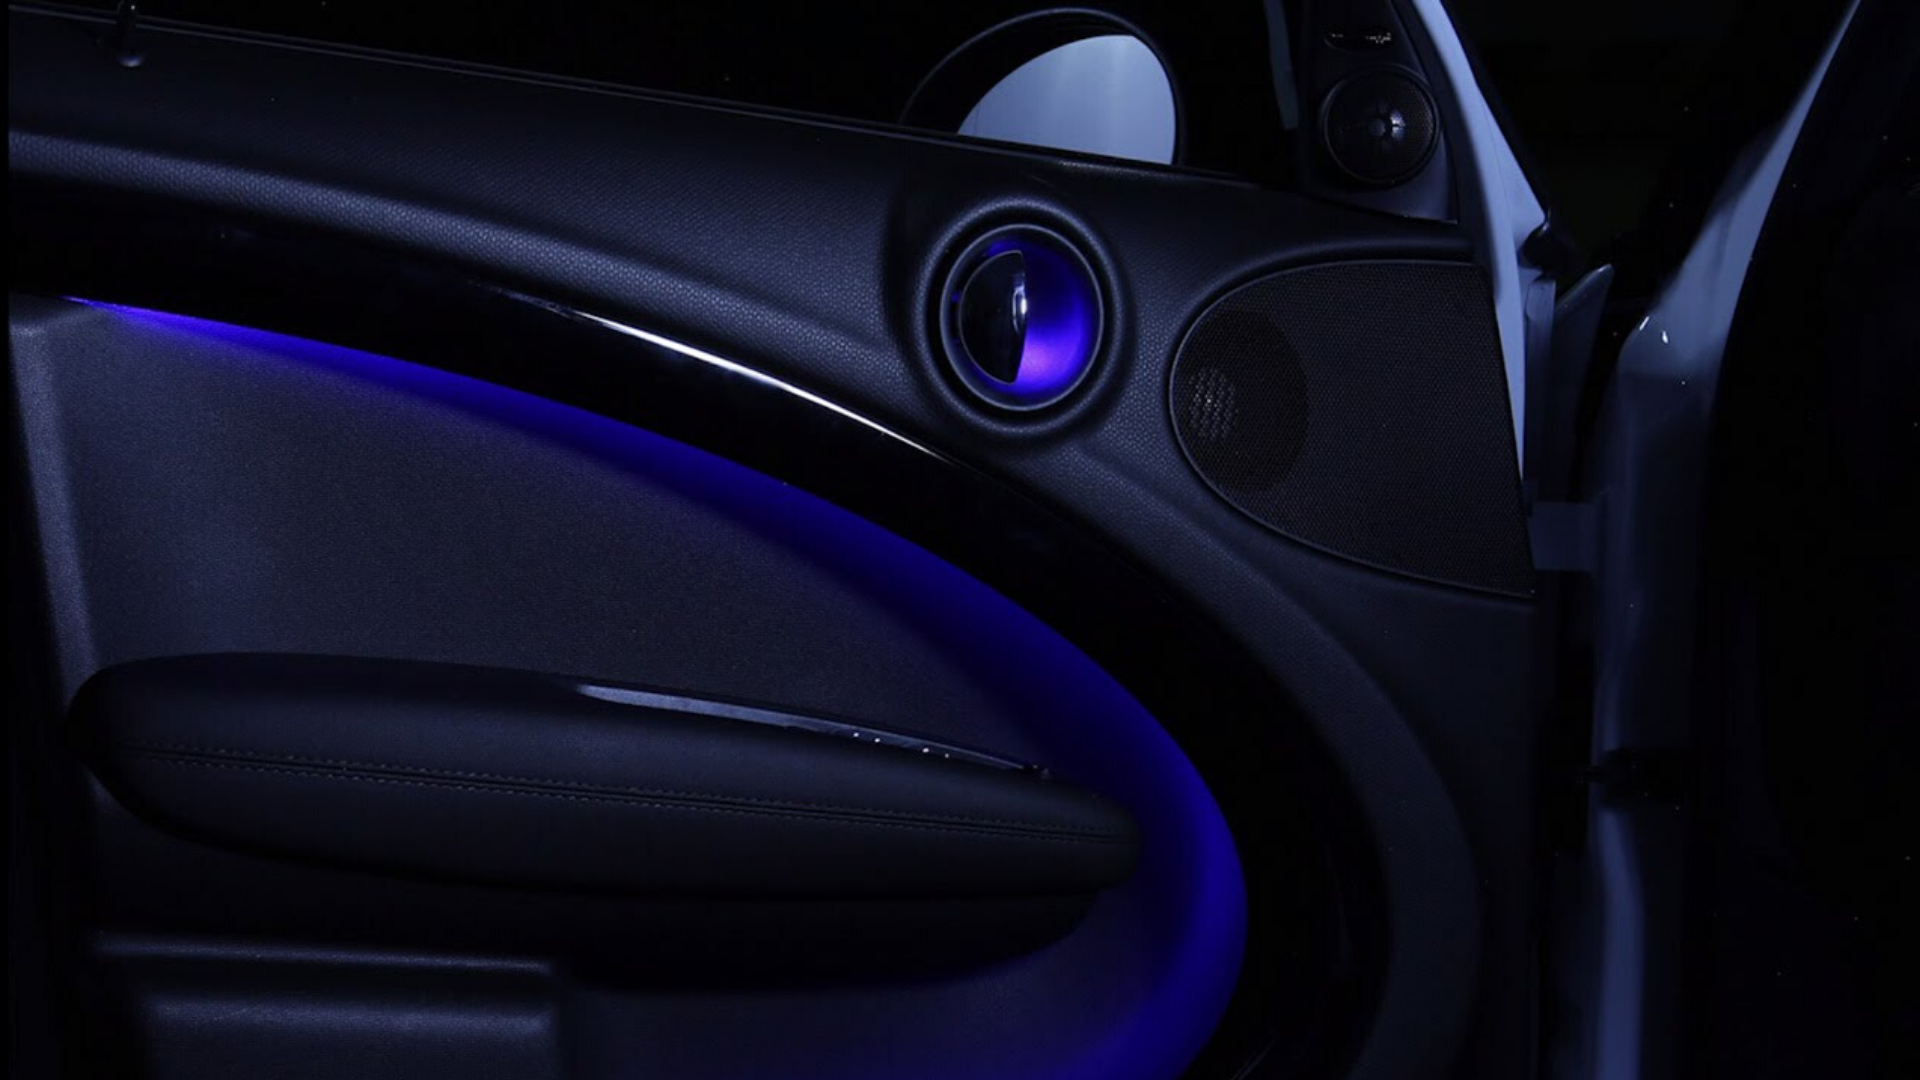 Click to find out how SCHOTT’s automotive ambient lighting sets the mood in automobiles